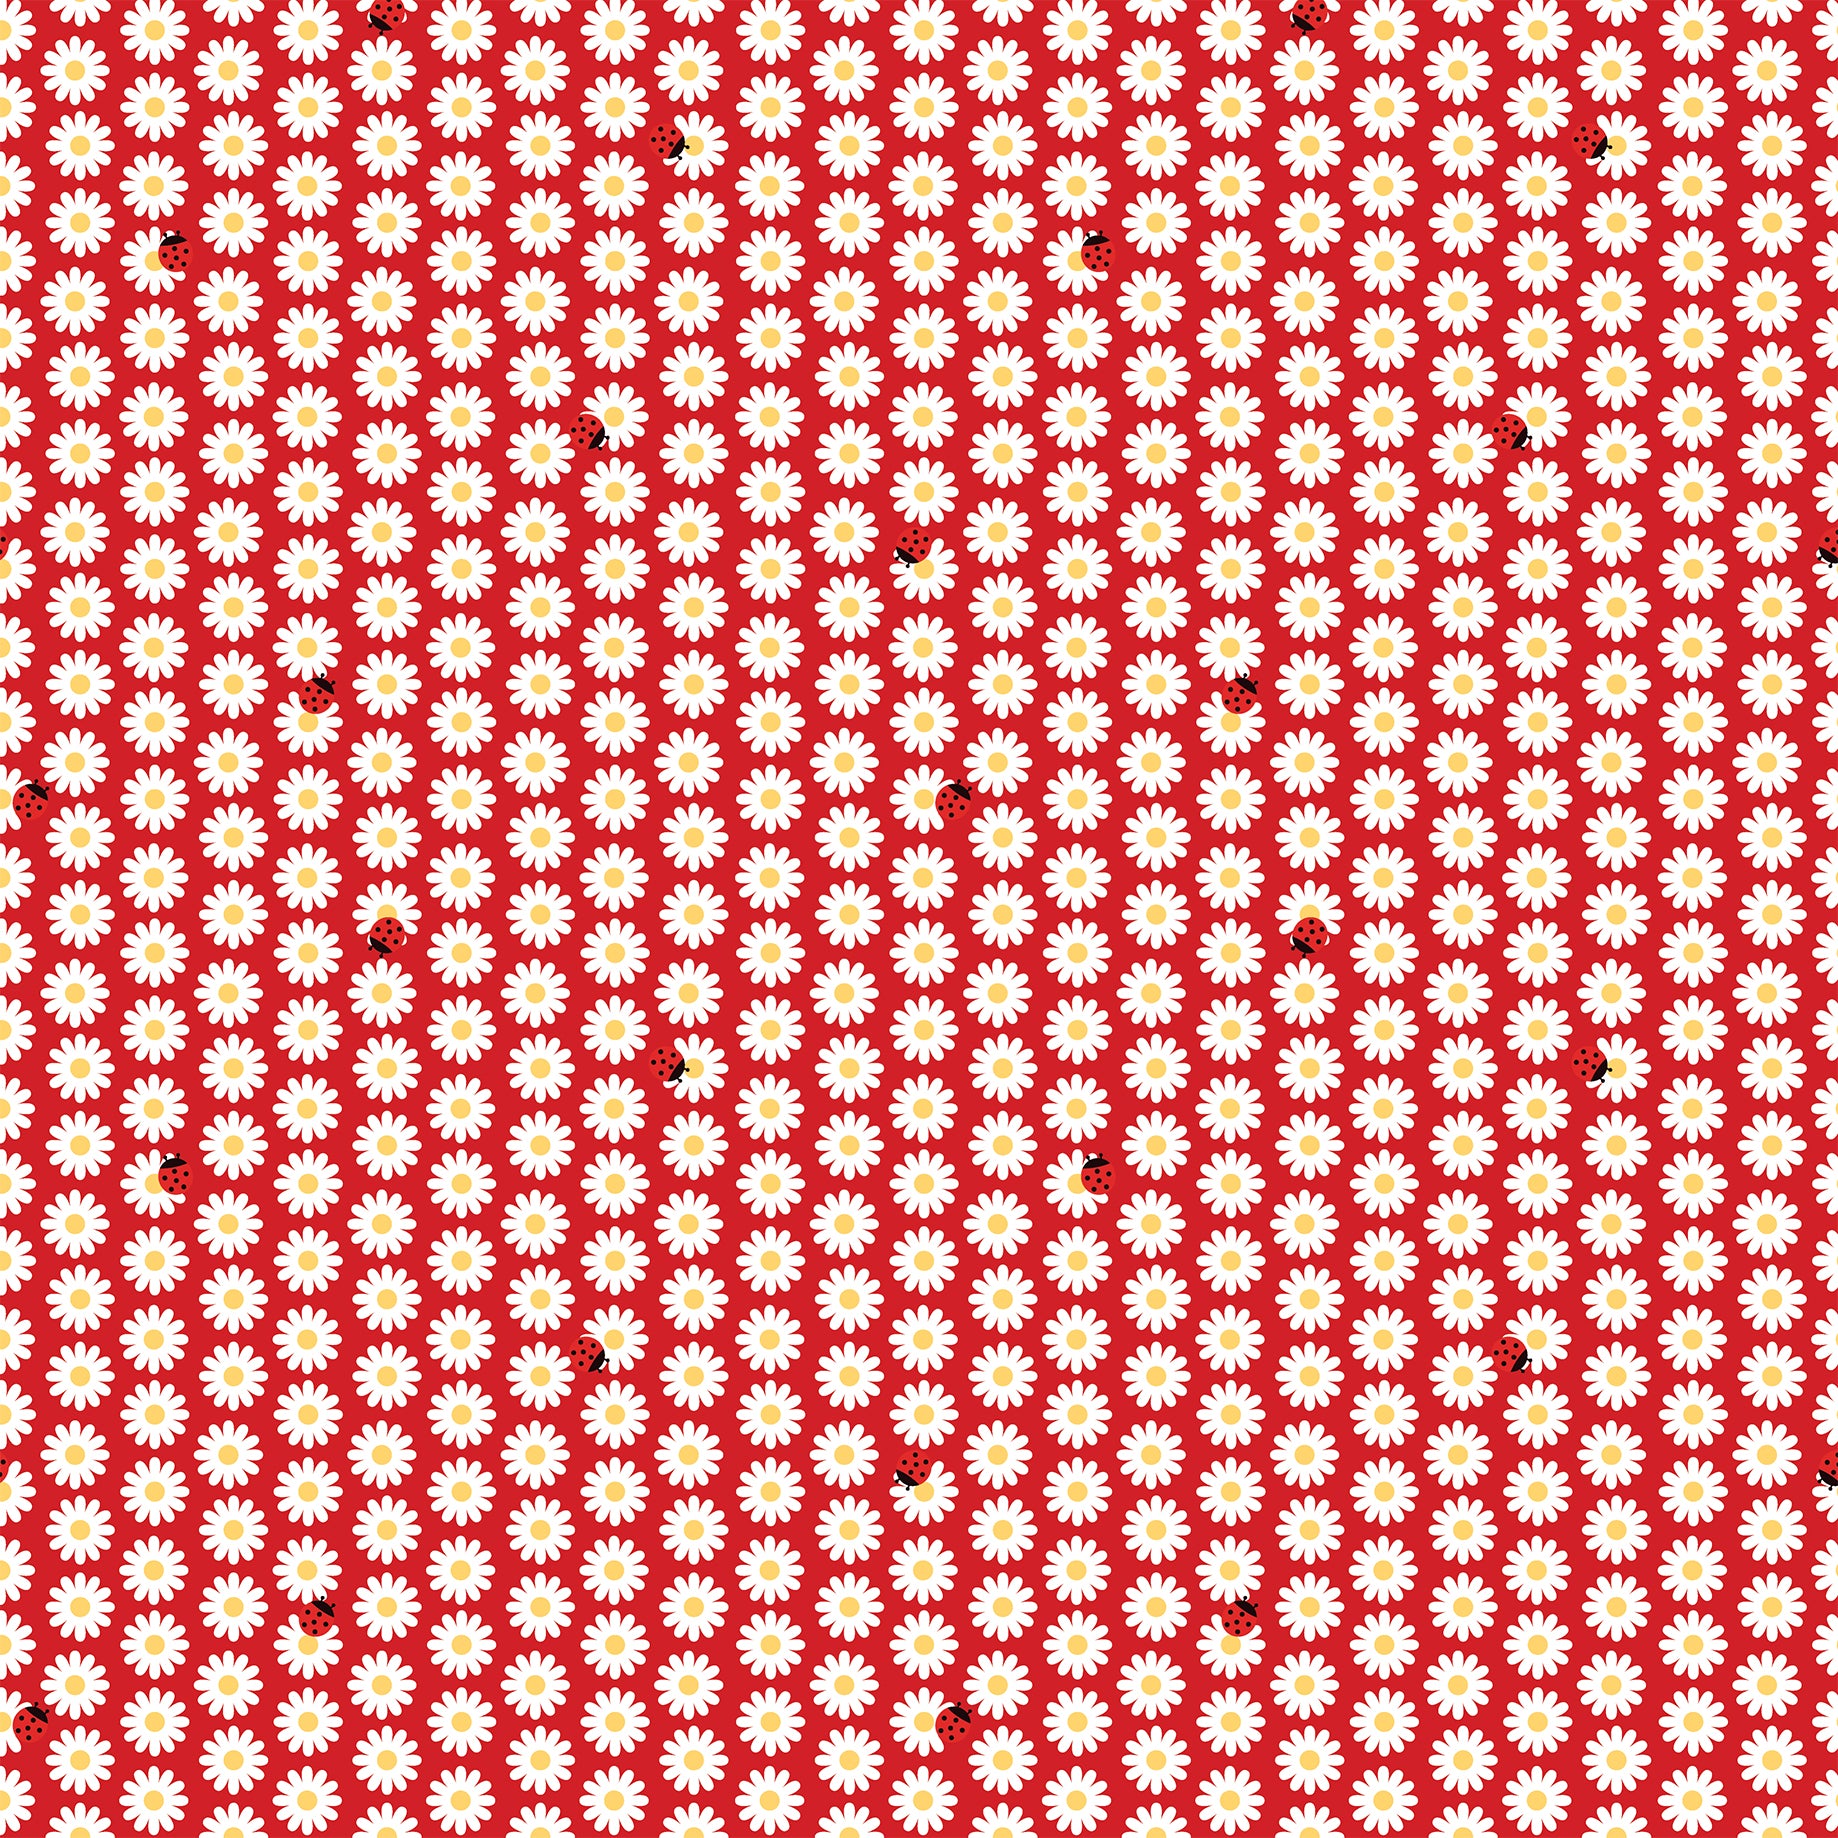 Little Ladybug Collection Delightful Daisies 12 x 12 Double-Sided Scrapbook Paper by Echo Park Paper